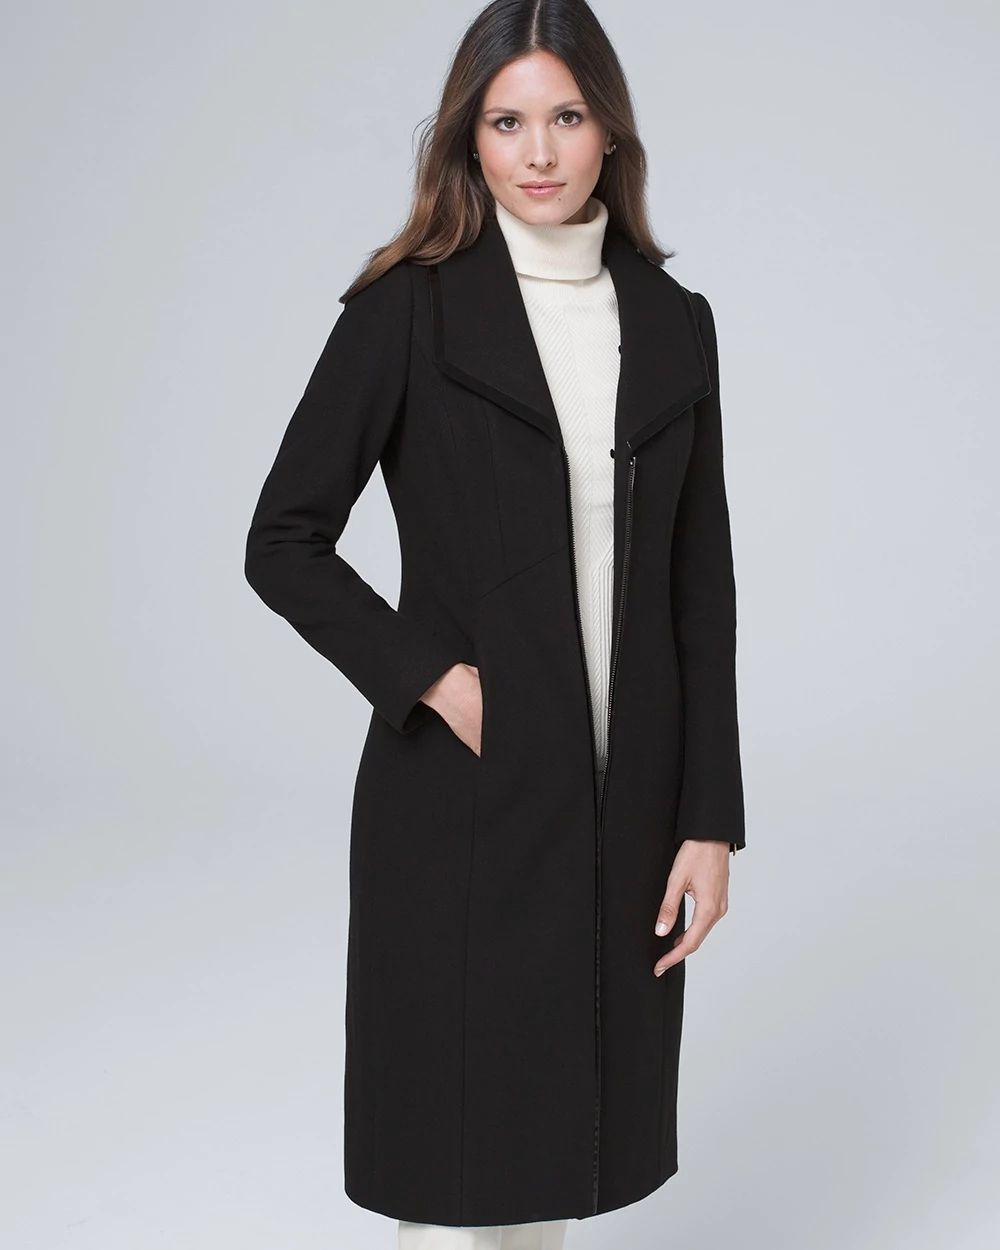 Classic Coat with Removable Faux Fur Collar click to view larger image.